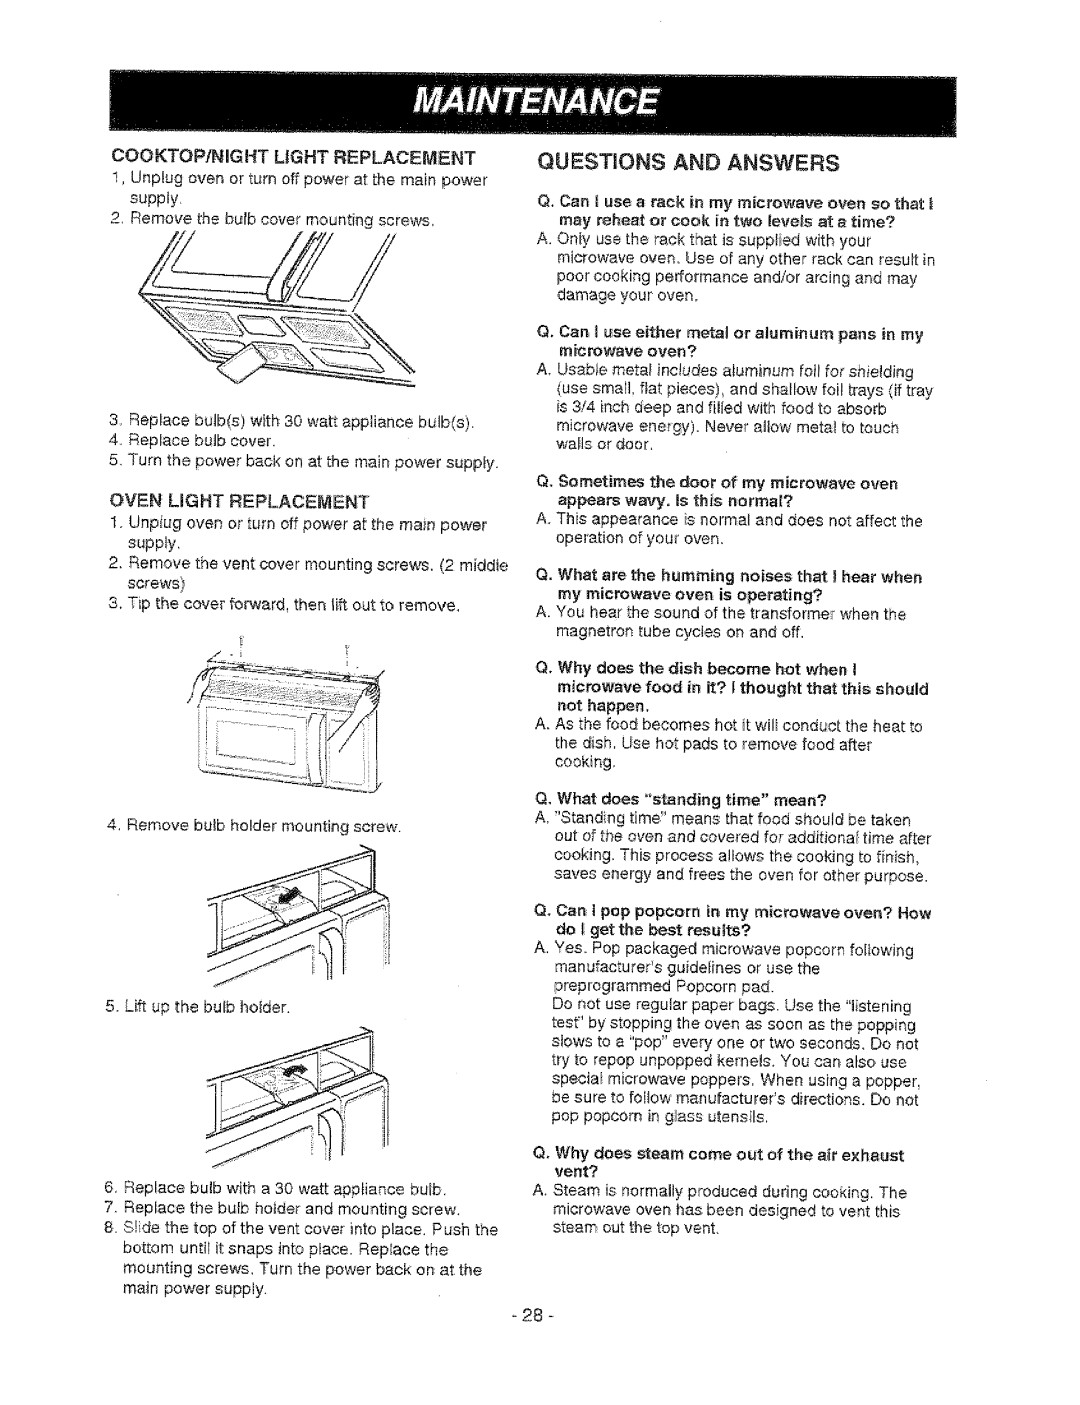 Sears 721.67601, 721.67602 owner manual Questions And Answers, COOKTOPff_IGHT LIGHT REPLACEMENT 